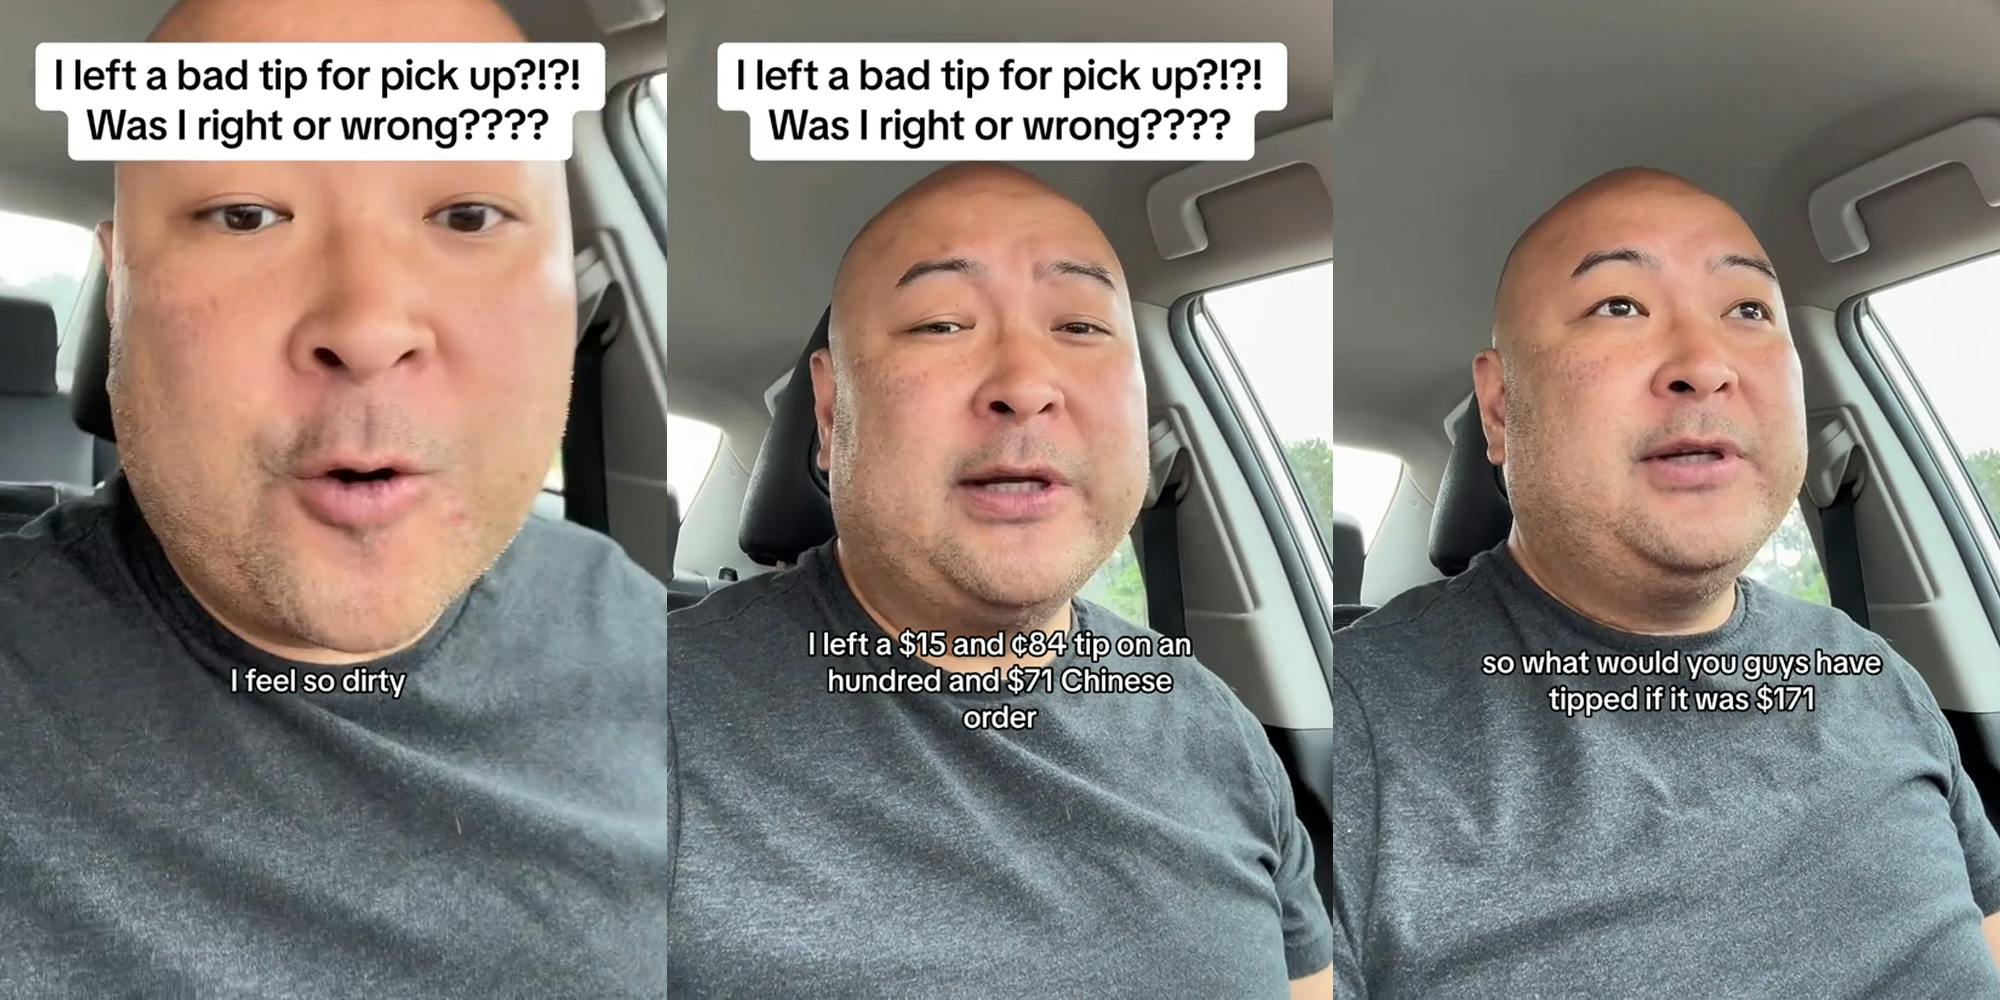 customer speaking in car with caption "I left a bad tip for pick up?!?! Was I right or wrong???? I feel so dirty" (l) customer speaking in car with caption "I left a bad tip for pick up?!?! Was I right or wrong I left a $15 and 84c tip on an hundred and $71 Chinese order" (c) customer speaking in car with caption "so what would you guys have tipped if it was $171" (r)